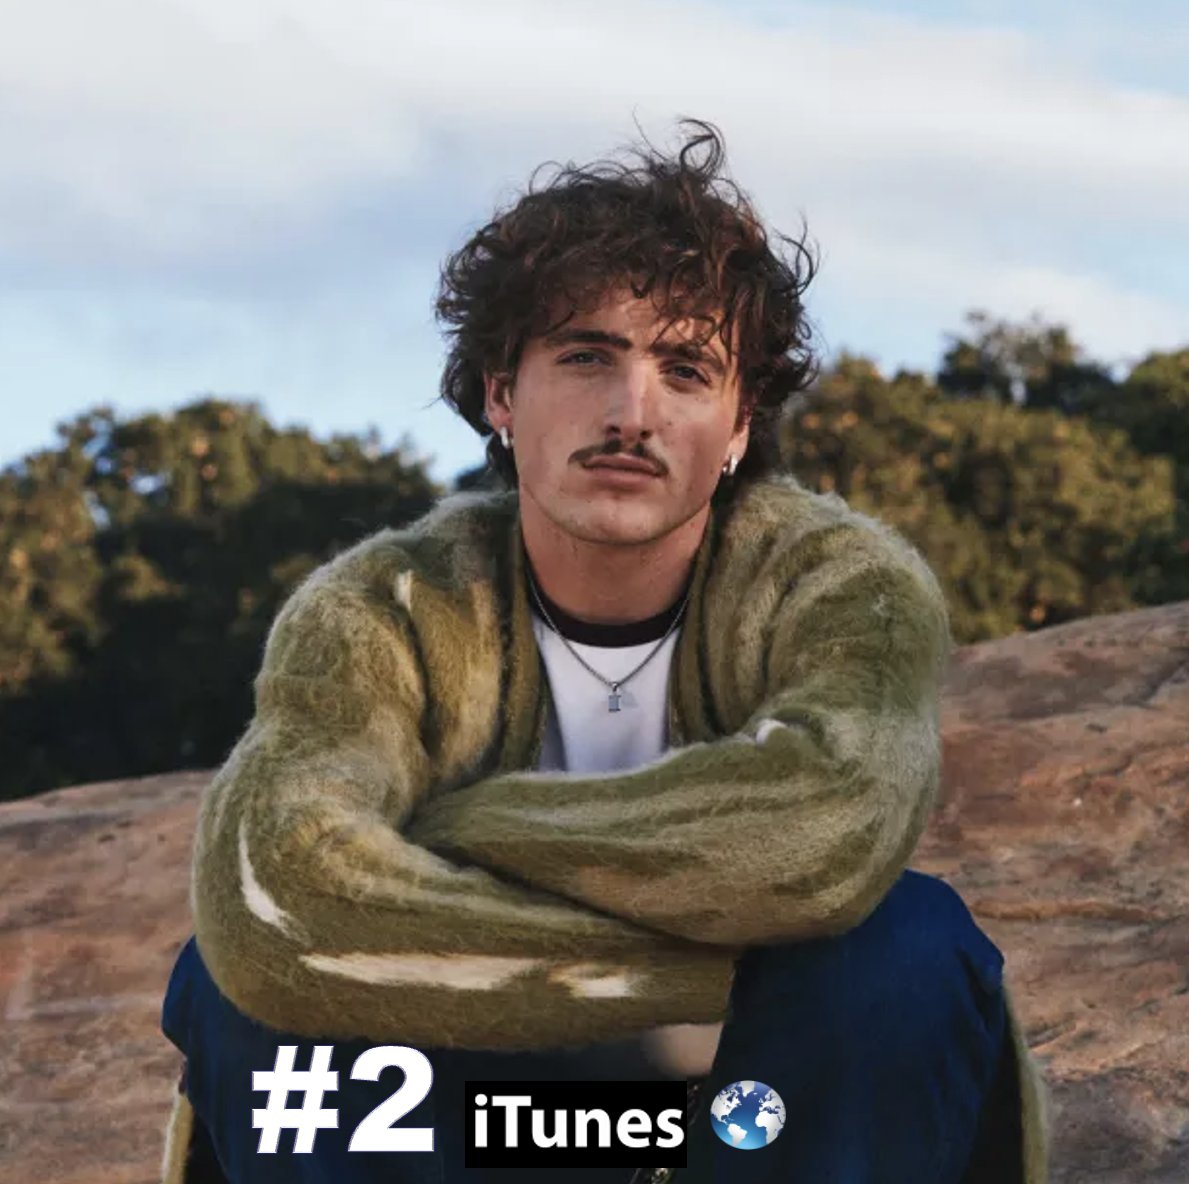 #BensonBoone's global smash hit 'Beautiful Things'  tops the European Apple Music song chart for a 68th day! 💪1⃣🇪🇺🍎🎼🎶📈✖️6⃣8⃣🕛🔥👑🧡

The song is #2 on the Worldwide iTunes song chart after 19 days at #1 and holds at #3 on the European iTunes song chart after 5 days at #1!